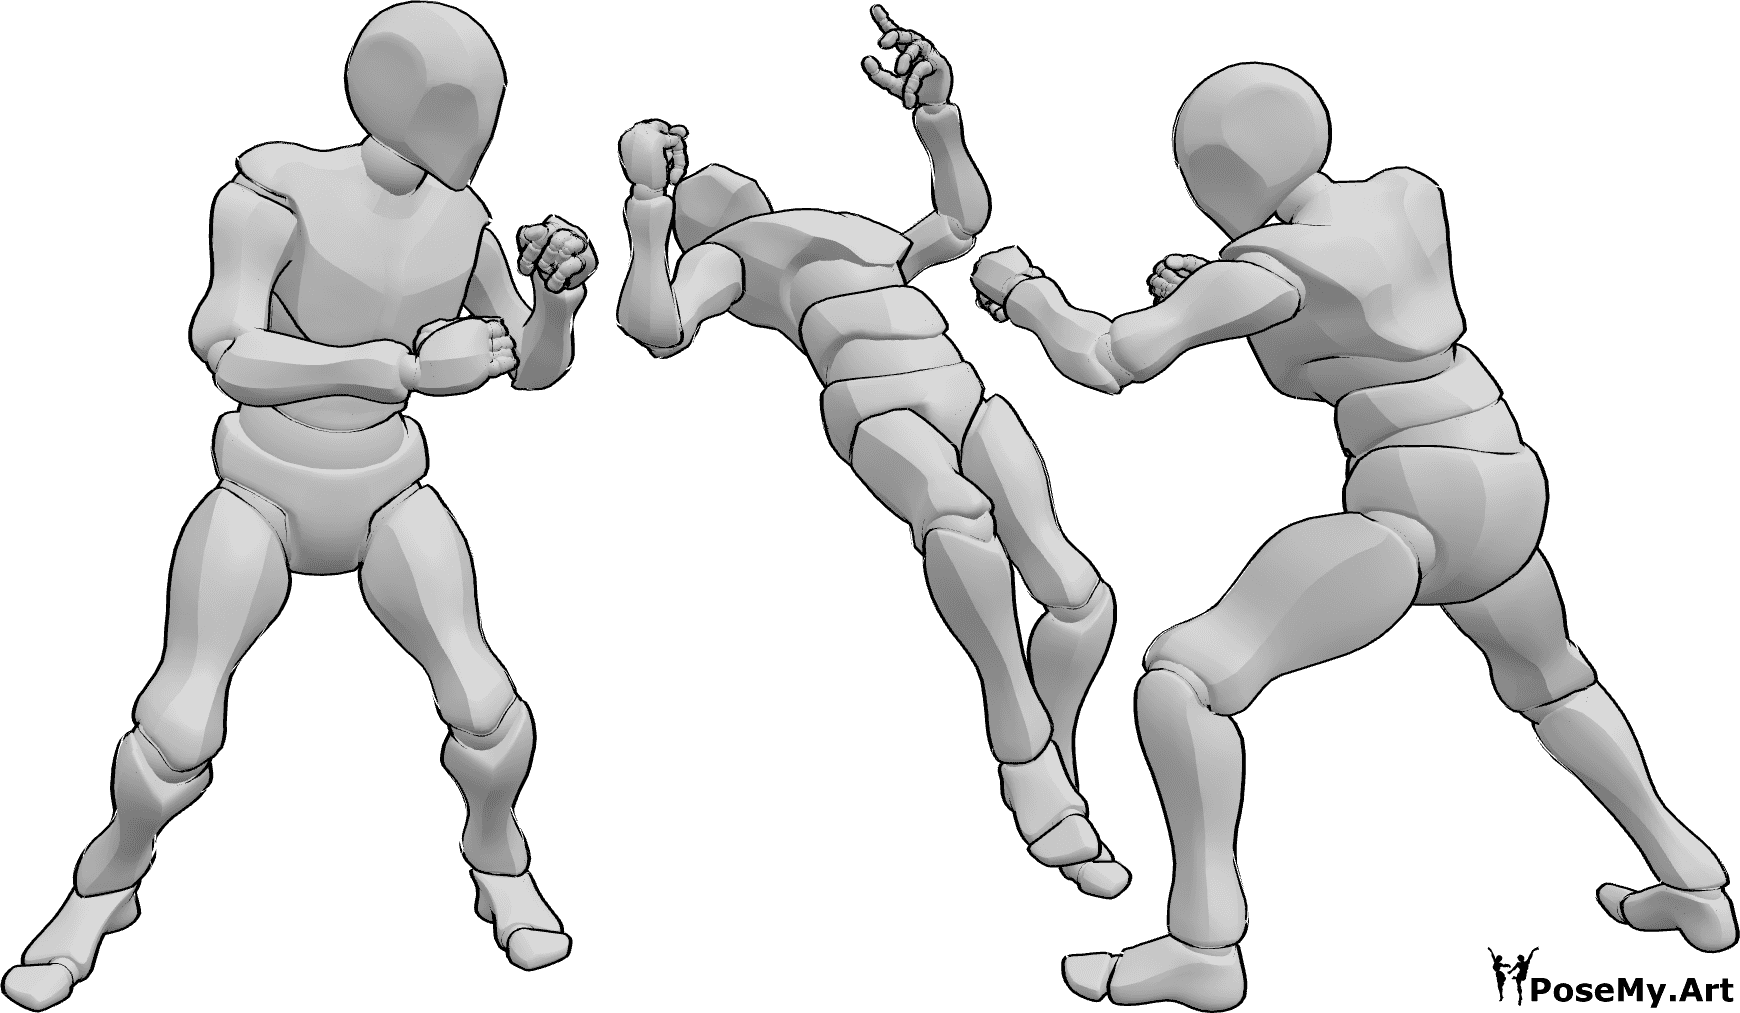 Pose Reference- Three males fight pose - Three males are fighting, one of them falls